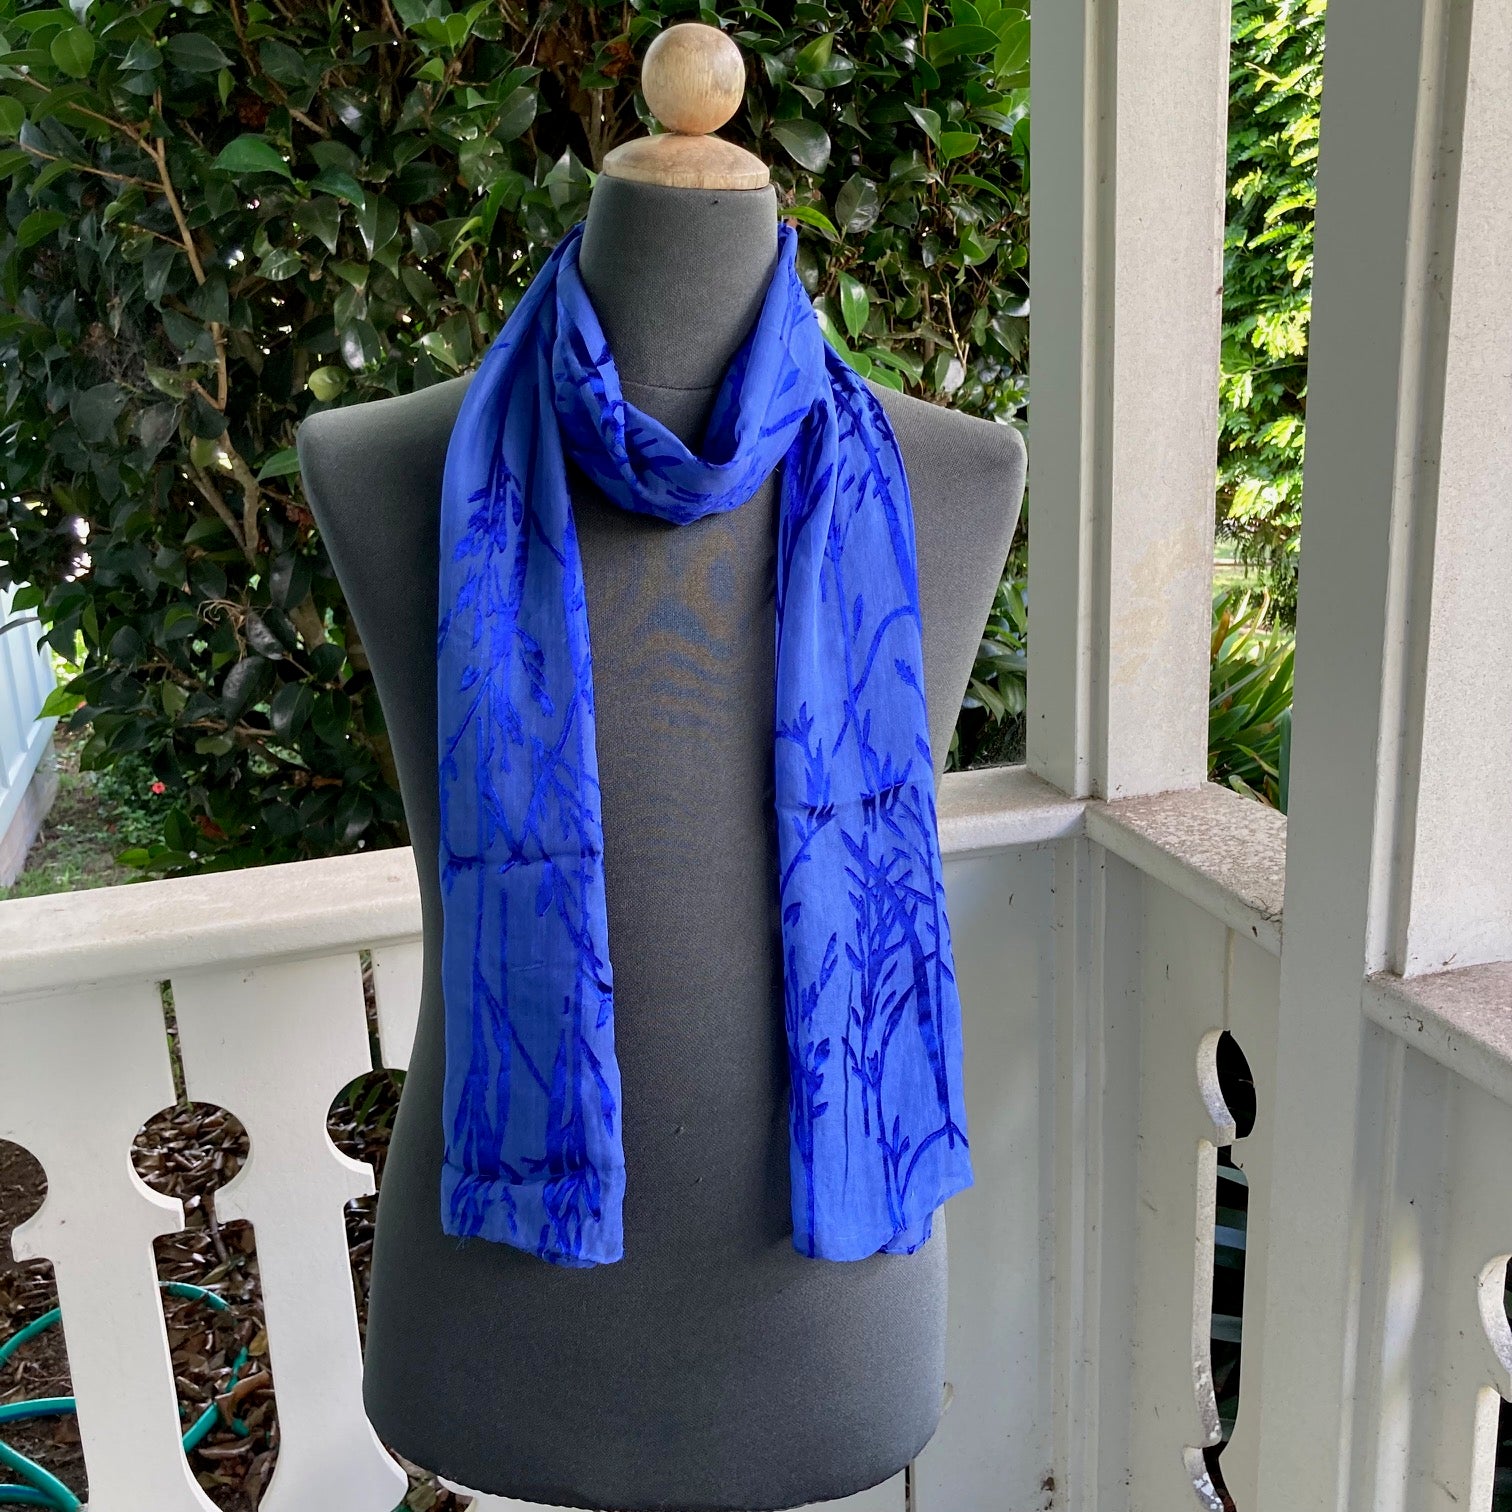 Devore Silk & Rayon Scarf in Royal Blue in the Bamboo Design